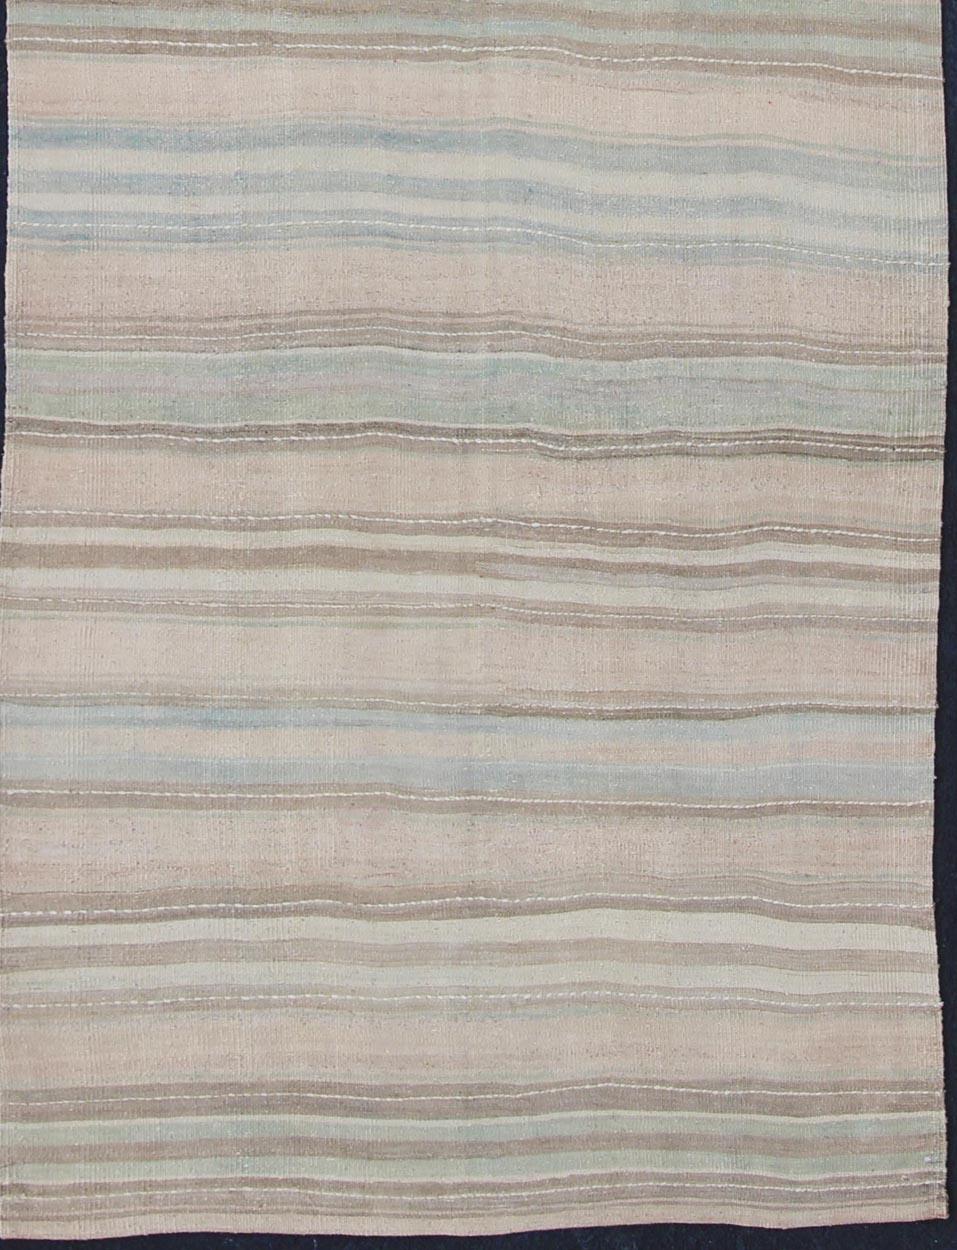 Stripe design Kilim runner from Turkey, rug en-1003, country of origin / type: Turkey / Kilim, circa 1950
striped flat-weave vintage Turkish Kilim wide runner with light colors.
This lightly-colored Turkish Kilim runner is flat-woven in a Minimalist